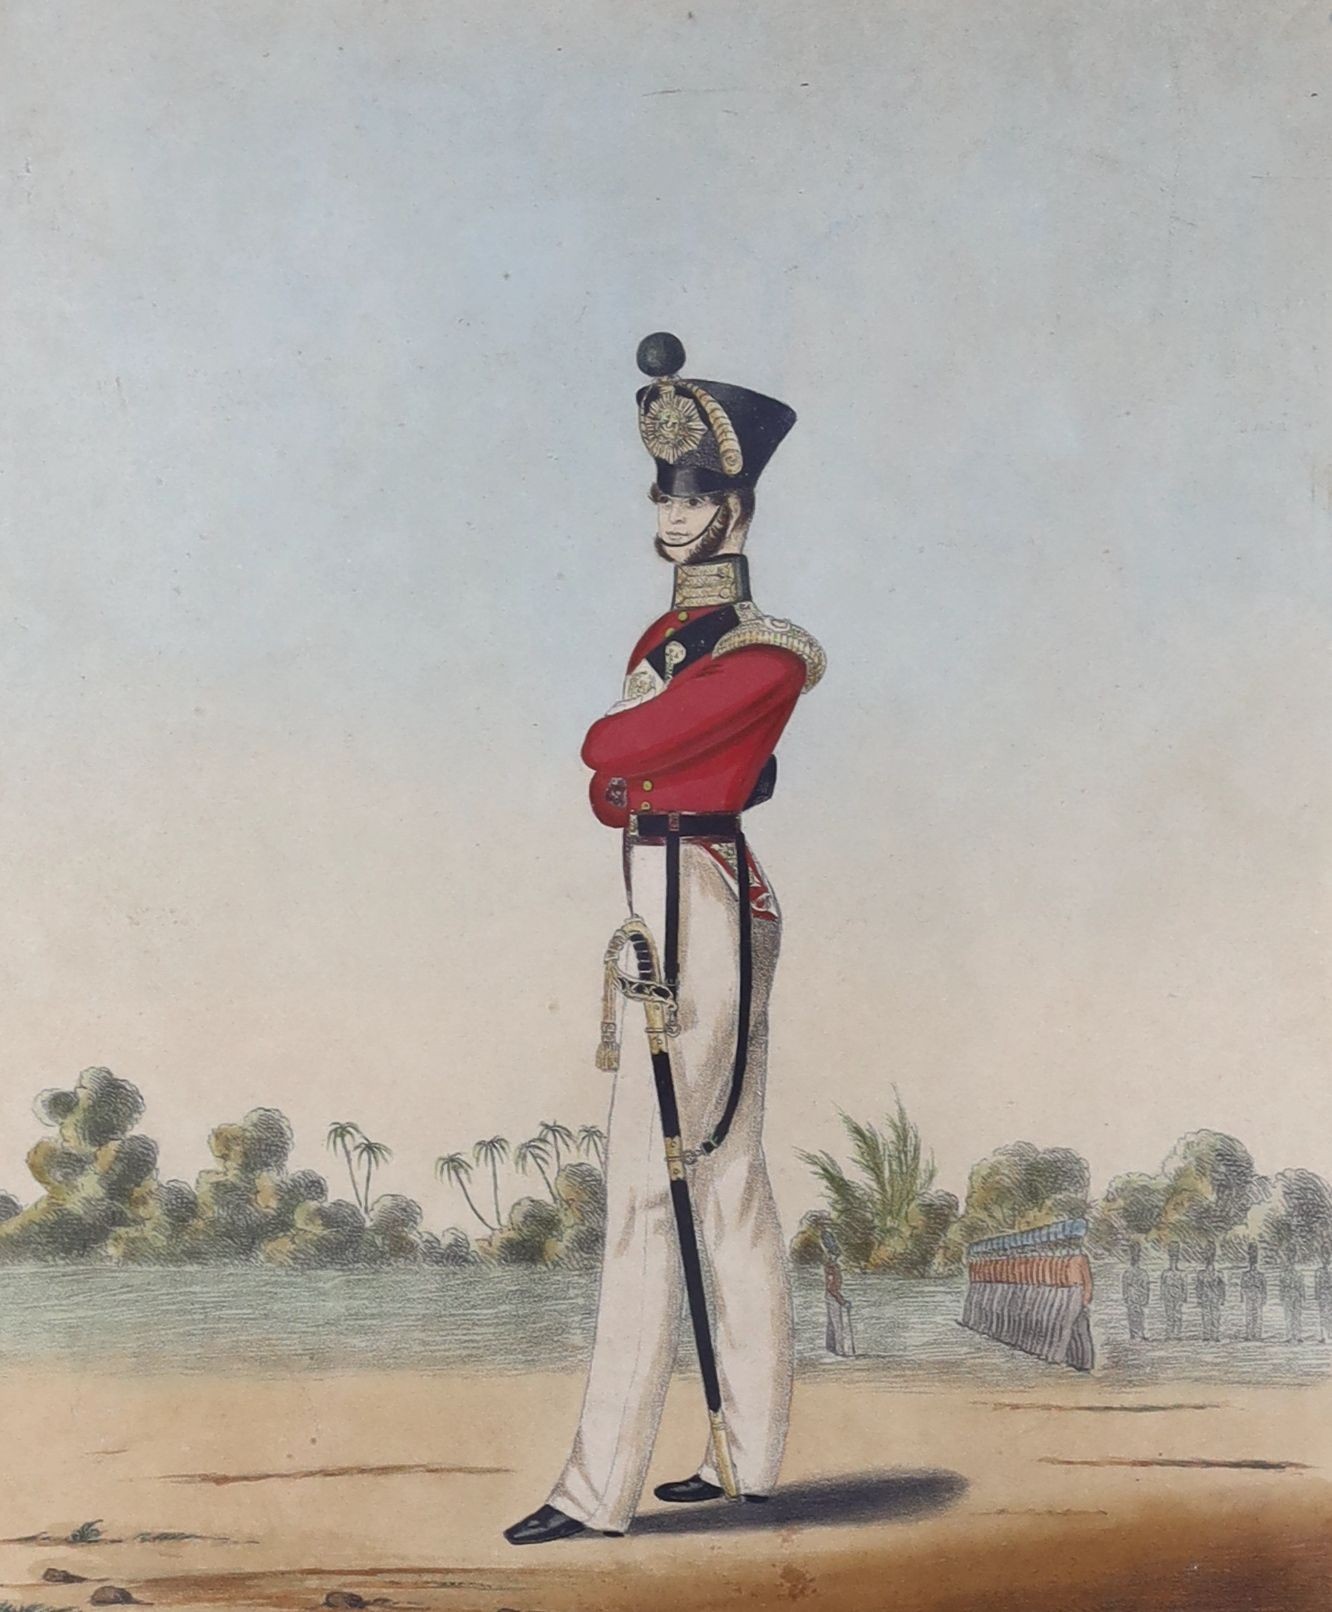 Porter after Hunsley, coloured lithograph, Officer's of The Madras Army, Light Infantry (dress),